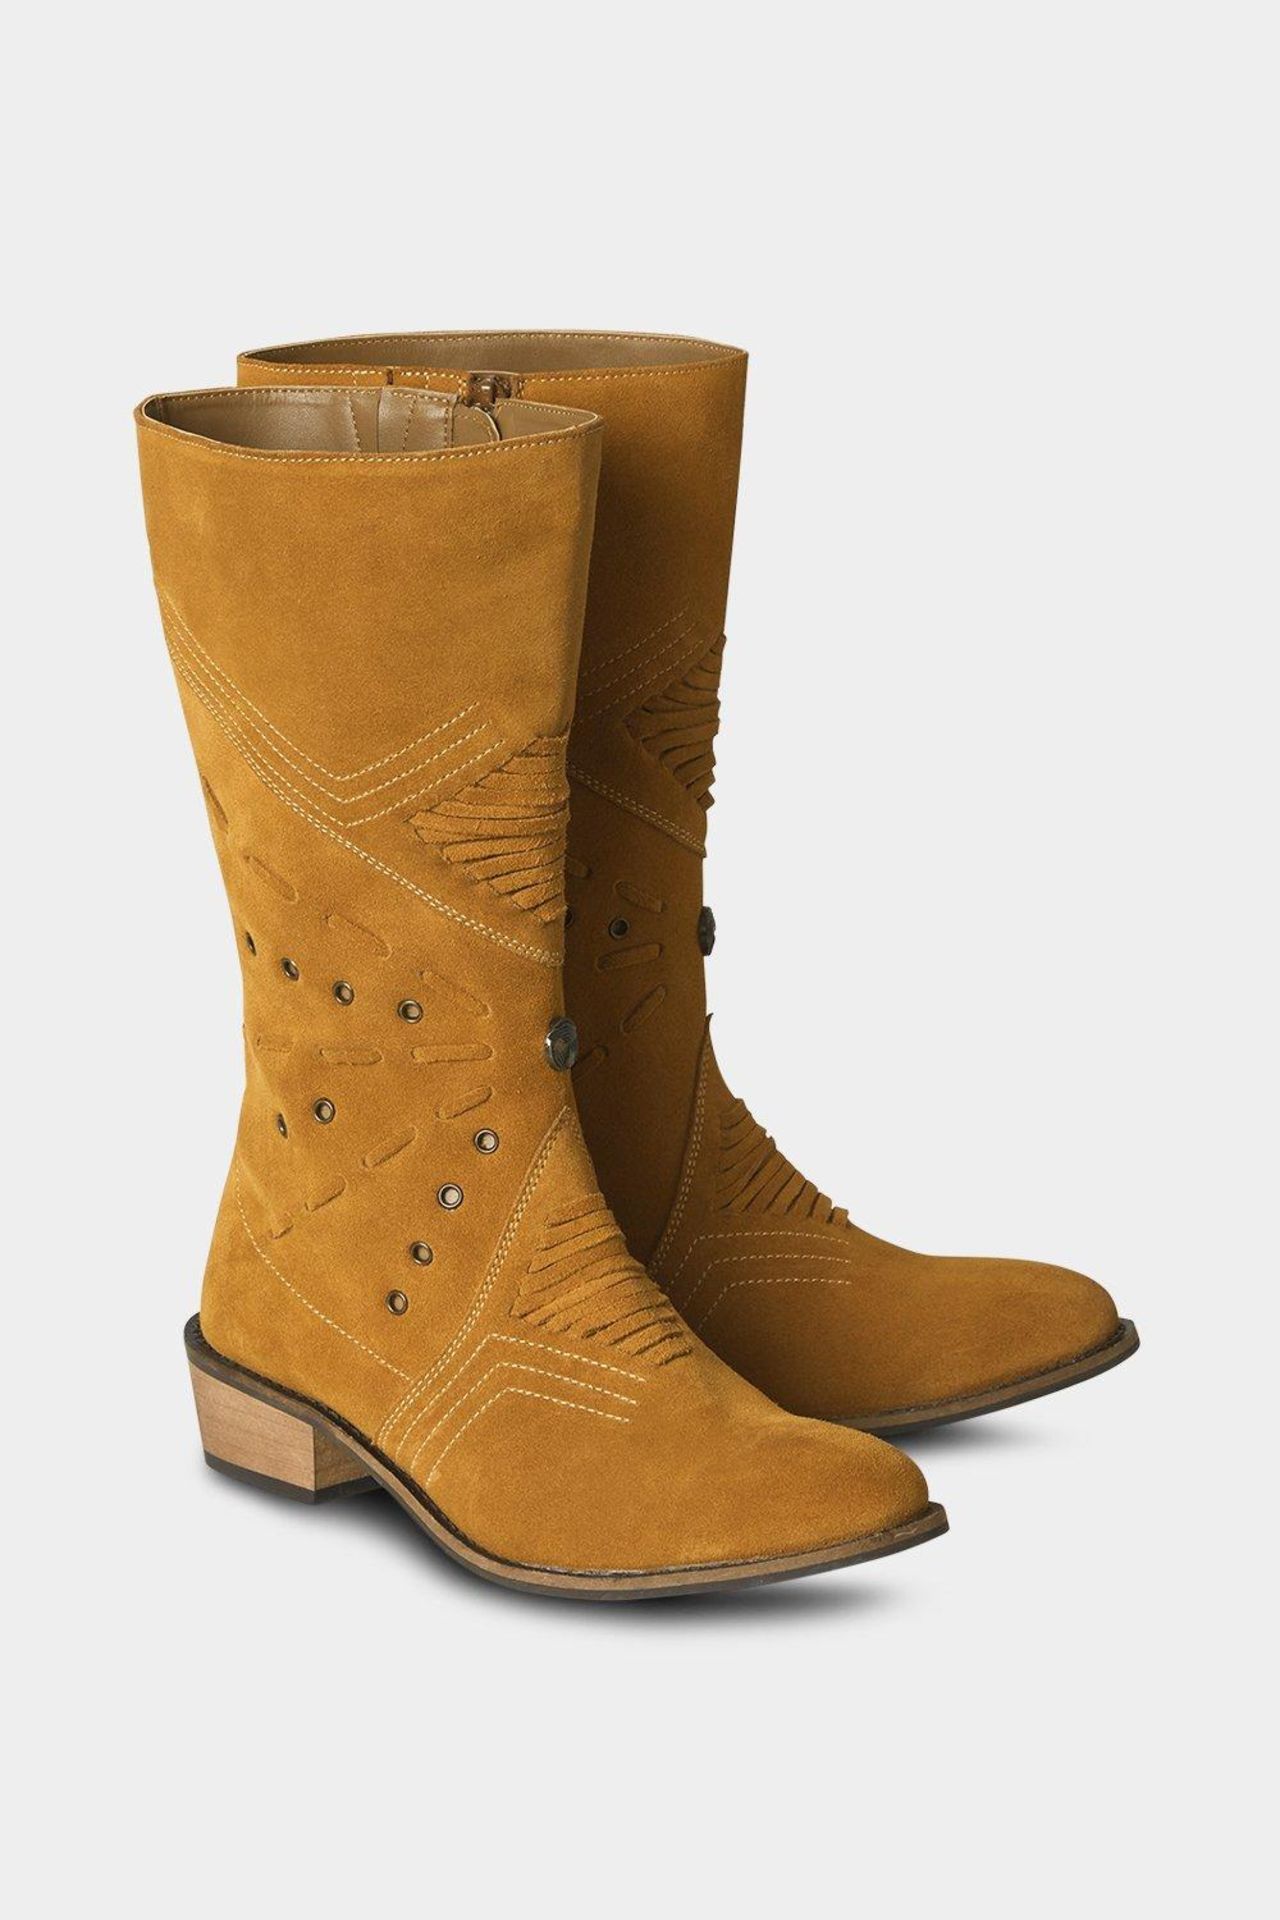 5 X BRAND NEW PAIRS OF JOE BROWNS TAN FASHION BOOTS SIZE 4 R15-3